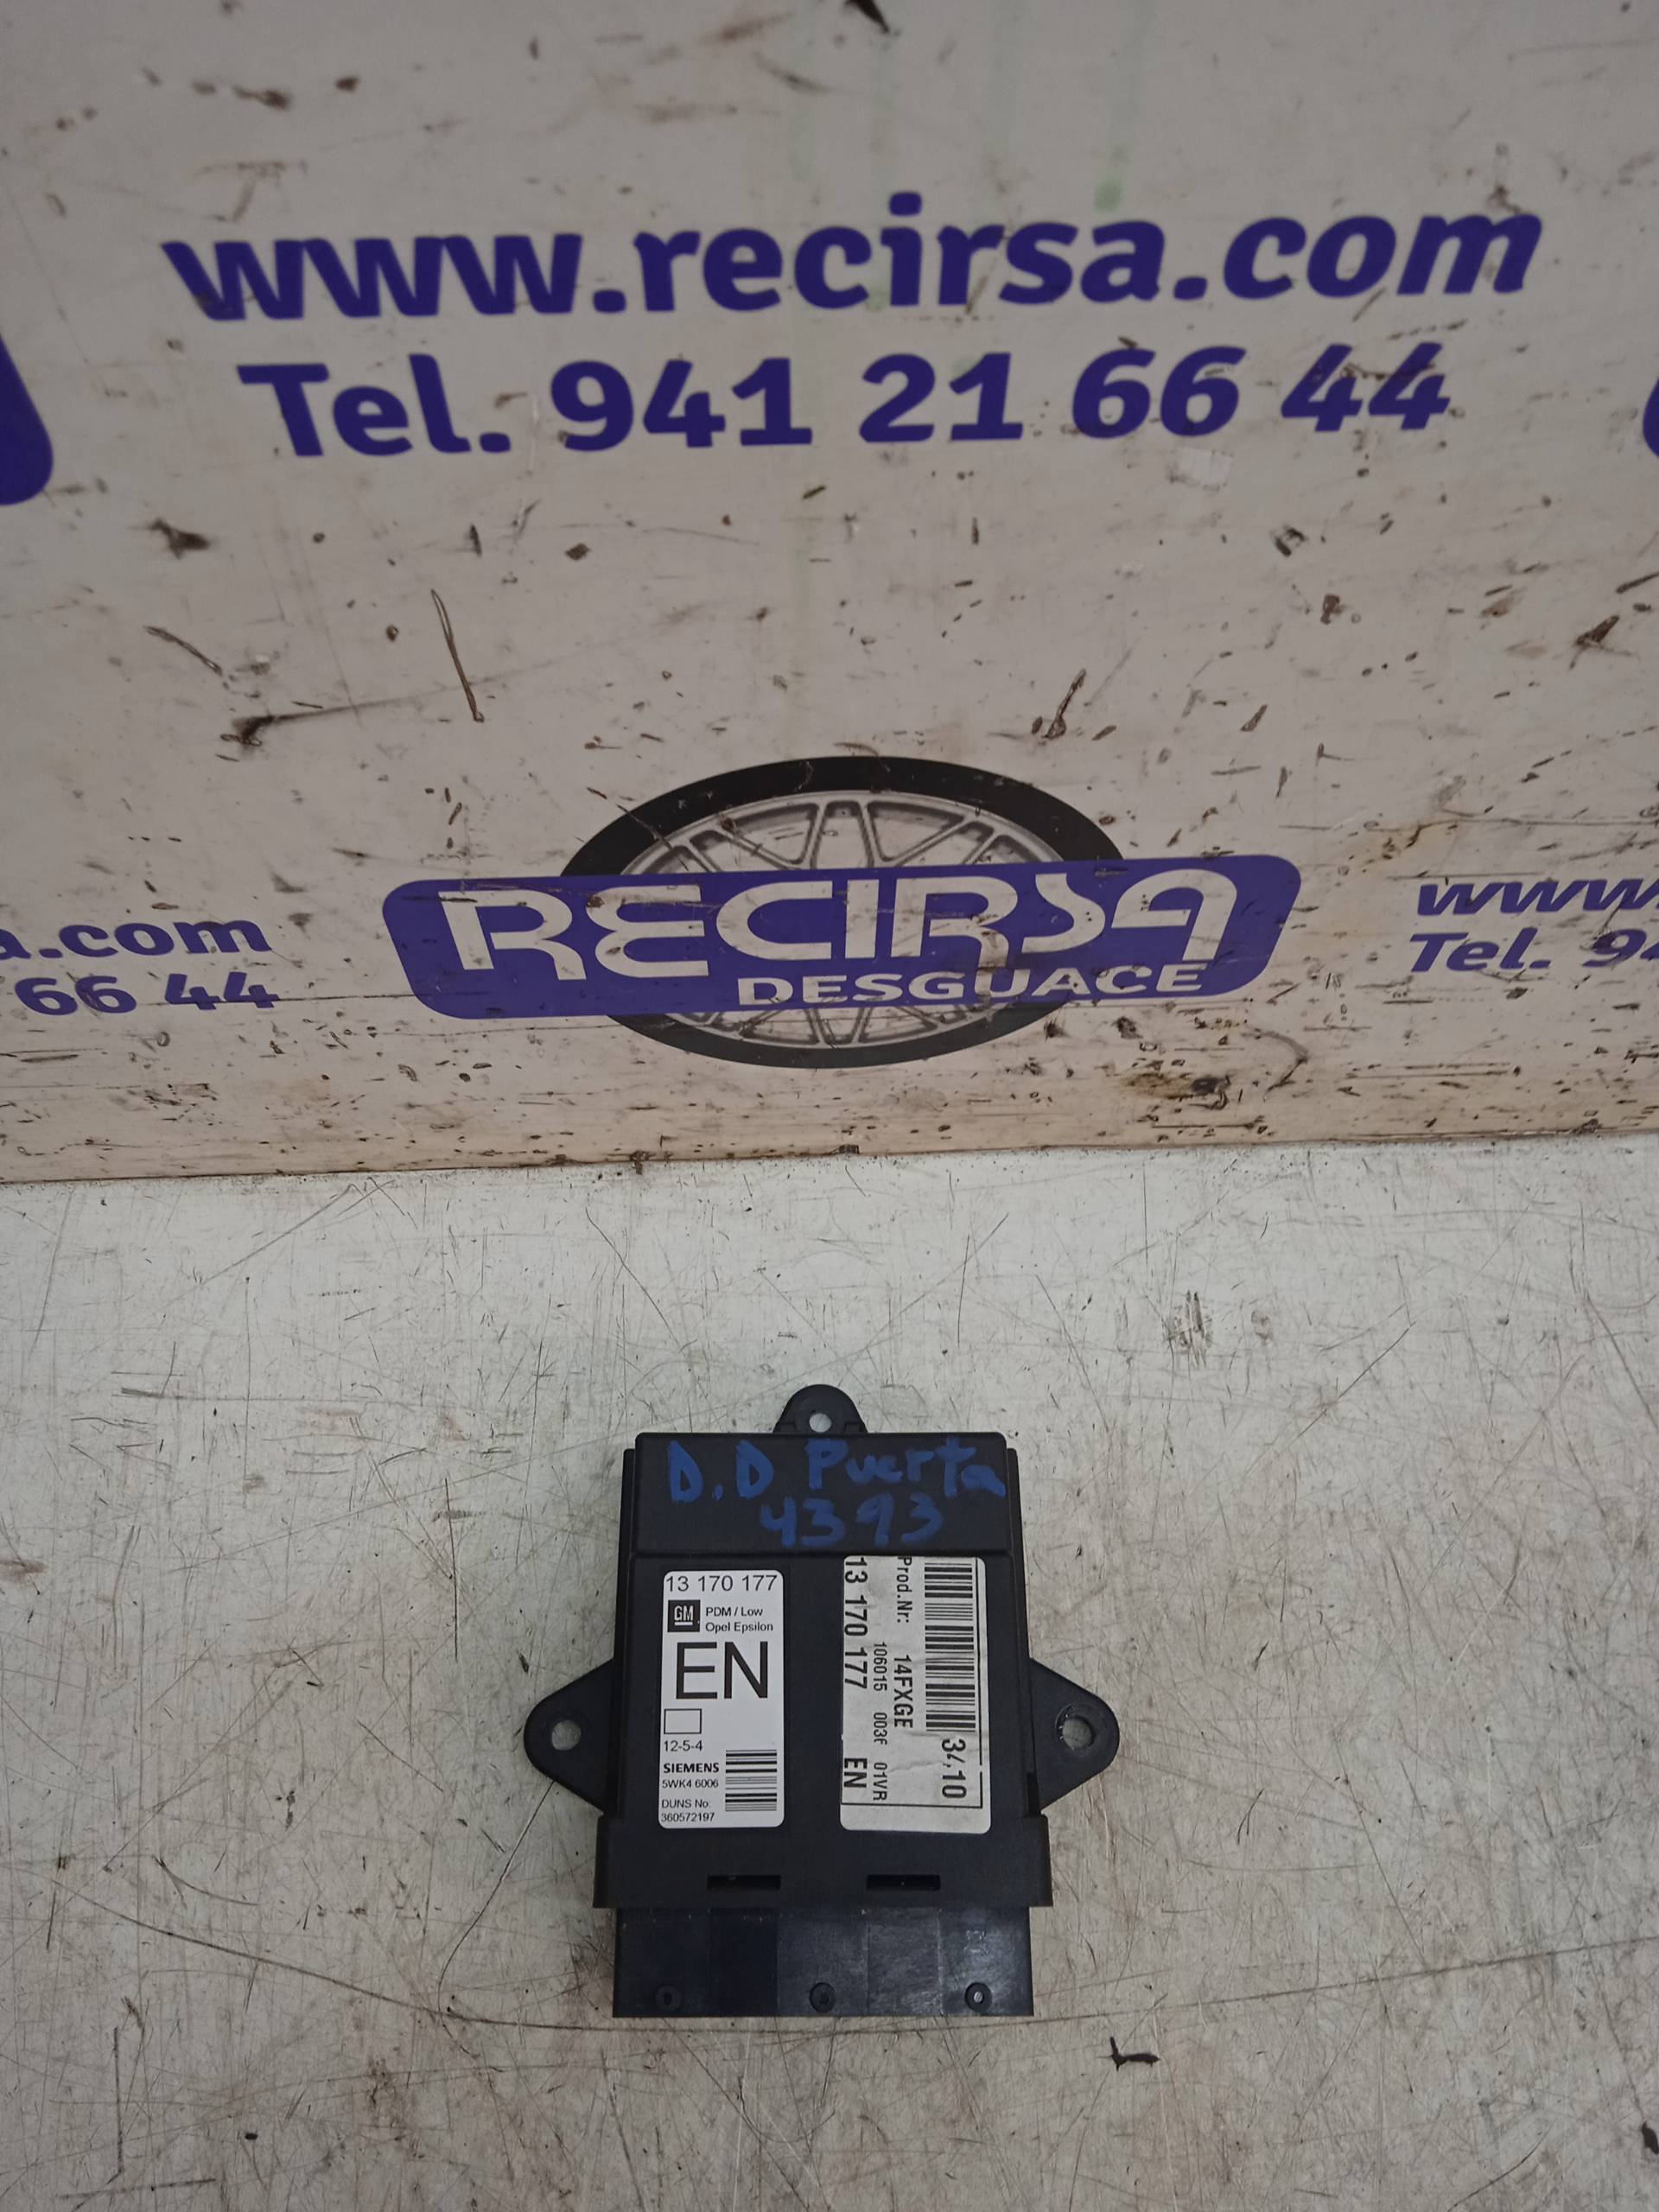 DODGE Vectra Other Control Units 13170178 24328785